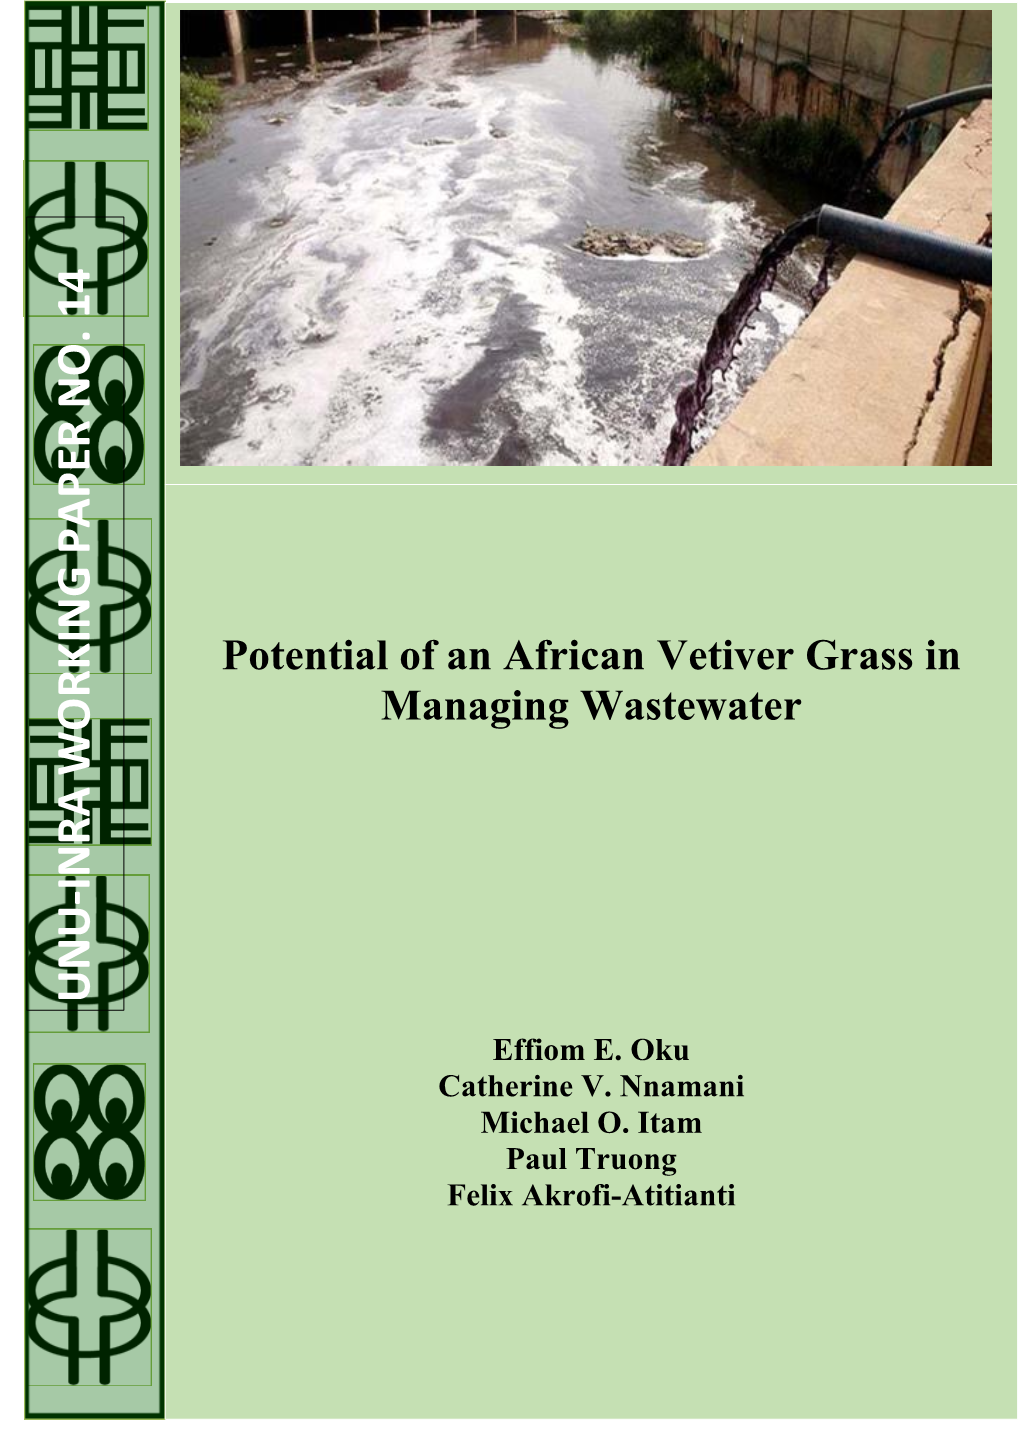 Potential of an African Vetiver Grass in Managing Wastewater